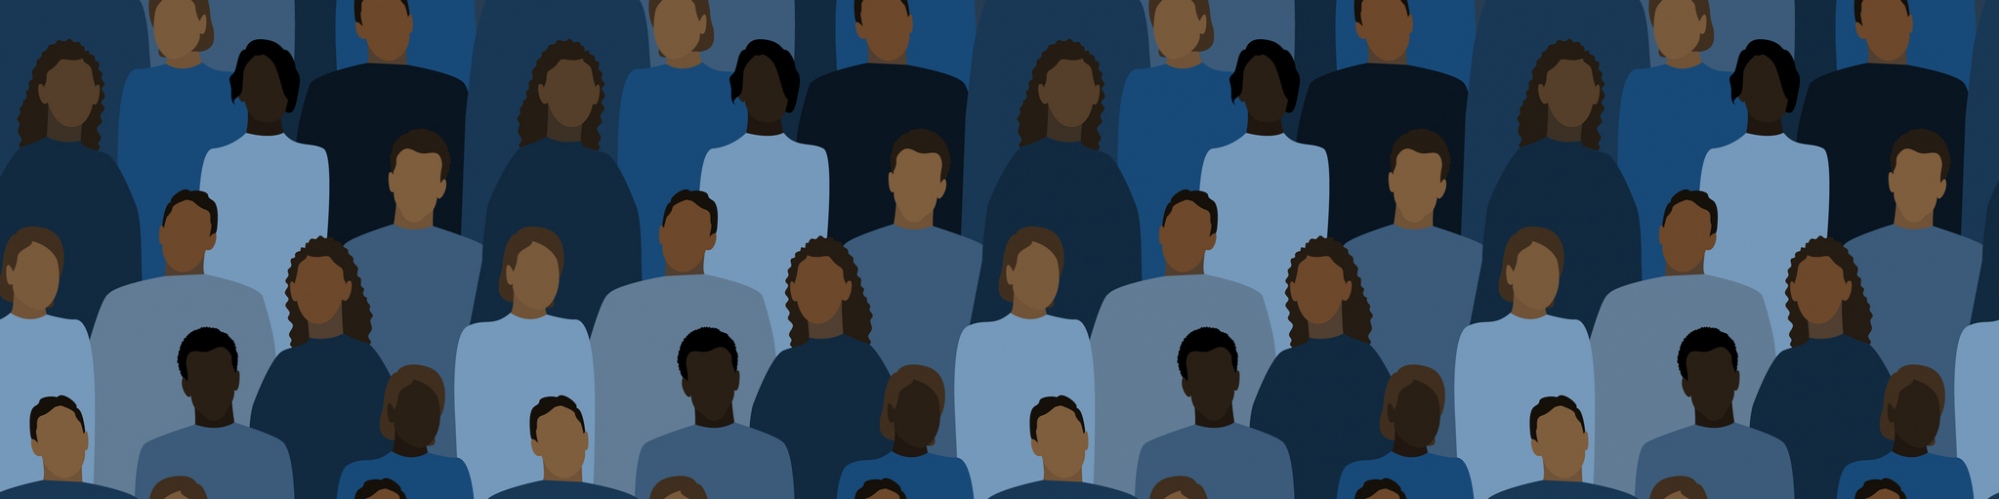 Vector style graphic of a crowd of people